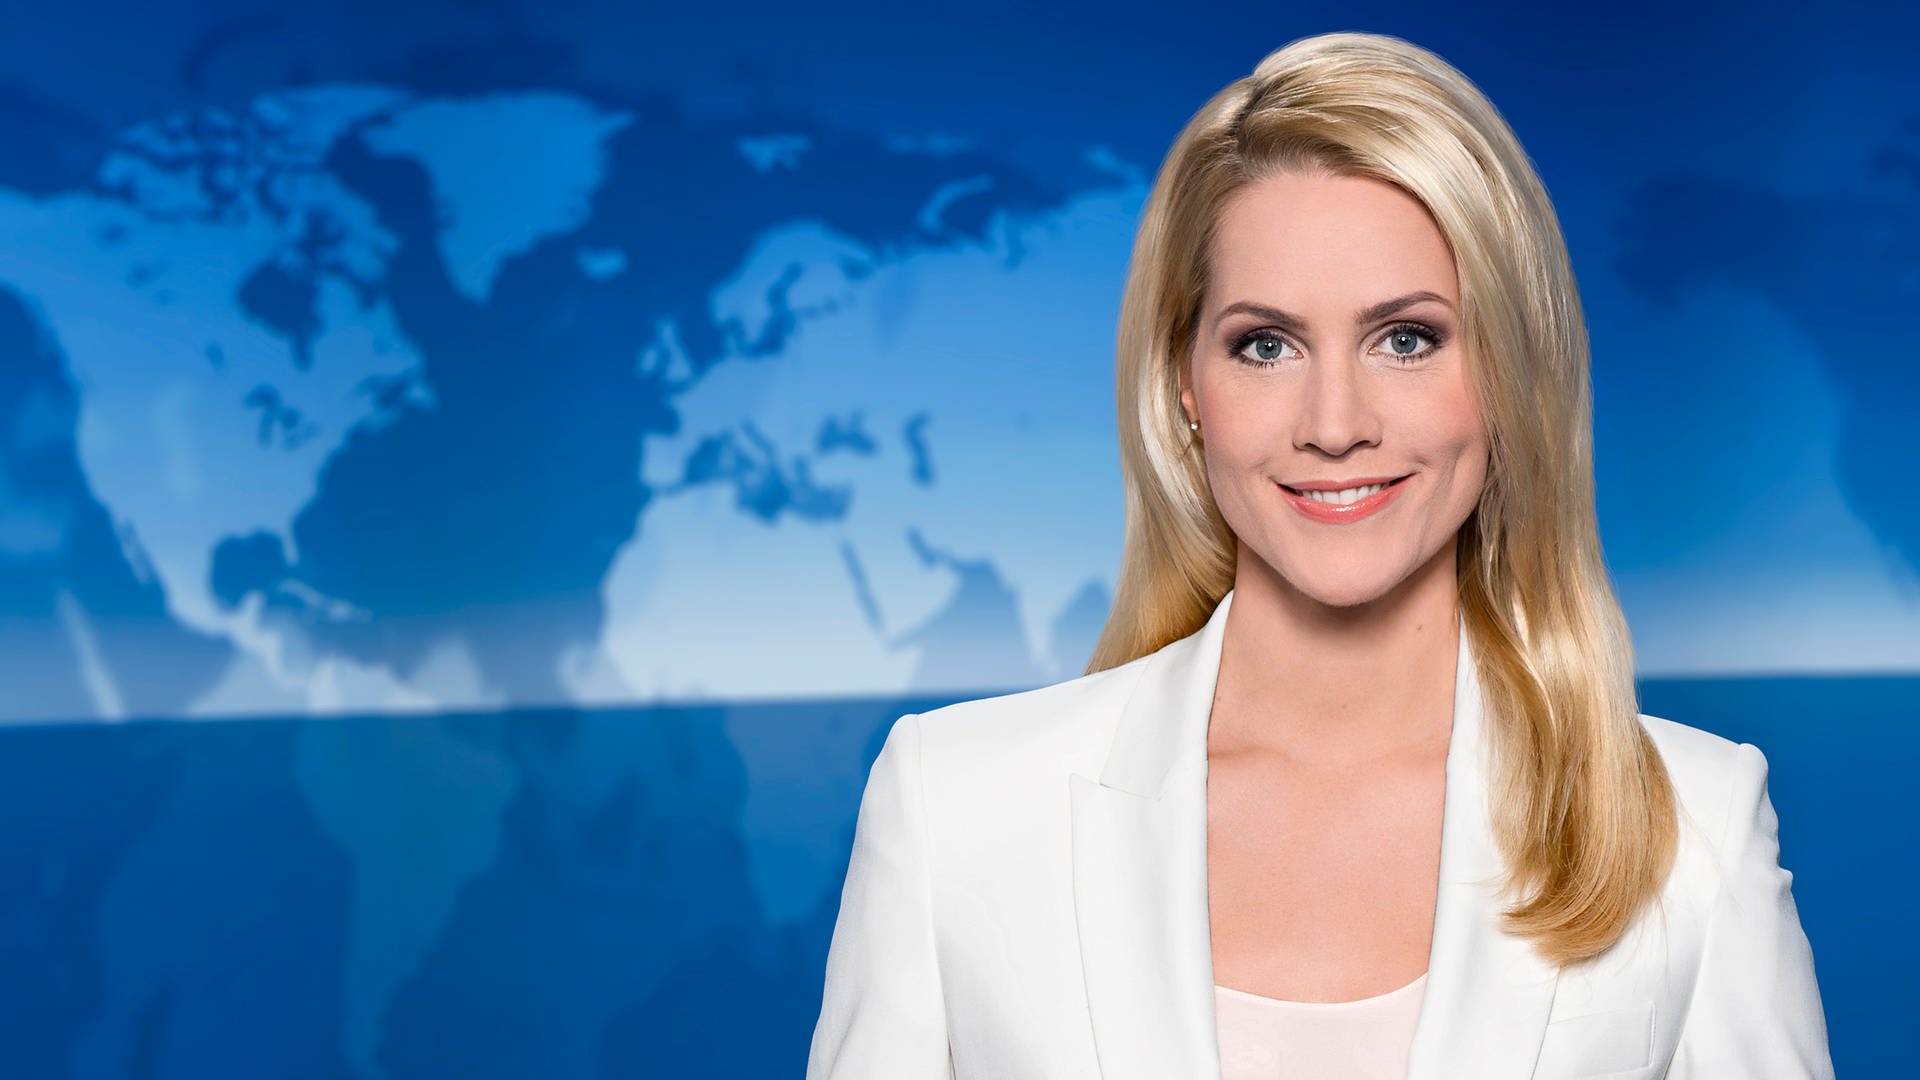 Top 40 Hottest News Anchors in the World